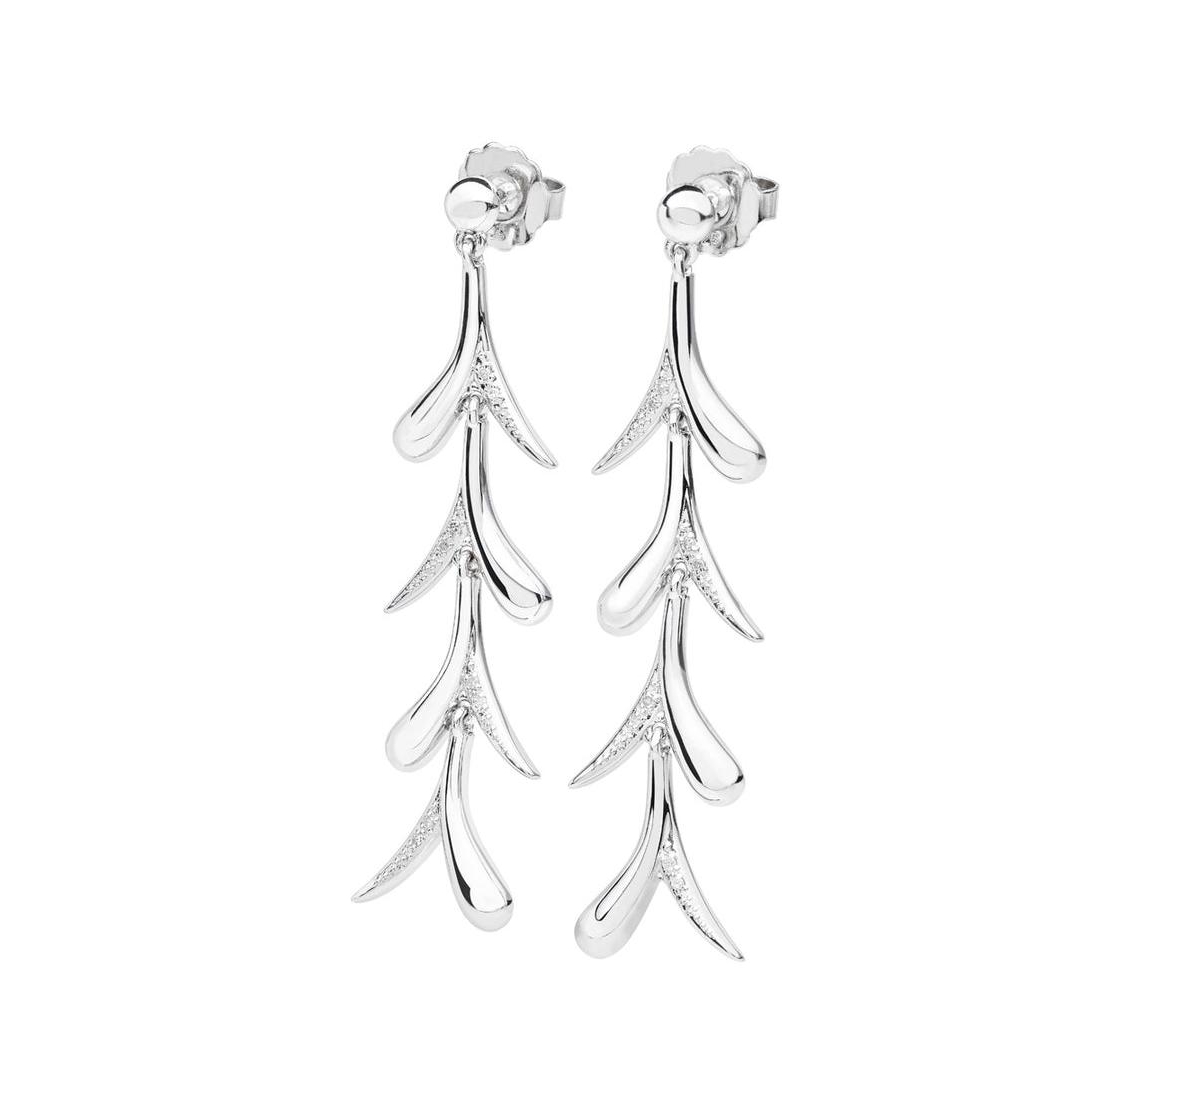 Sycamore Kiss Earrings - Silver